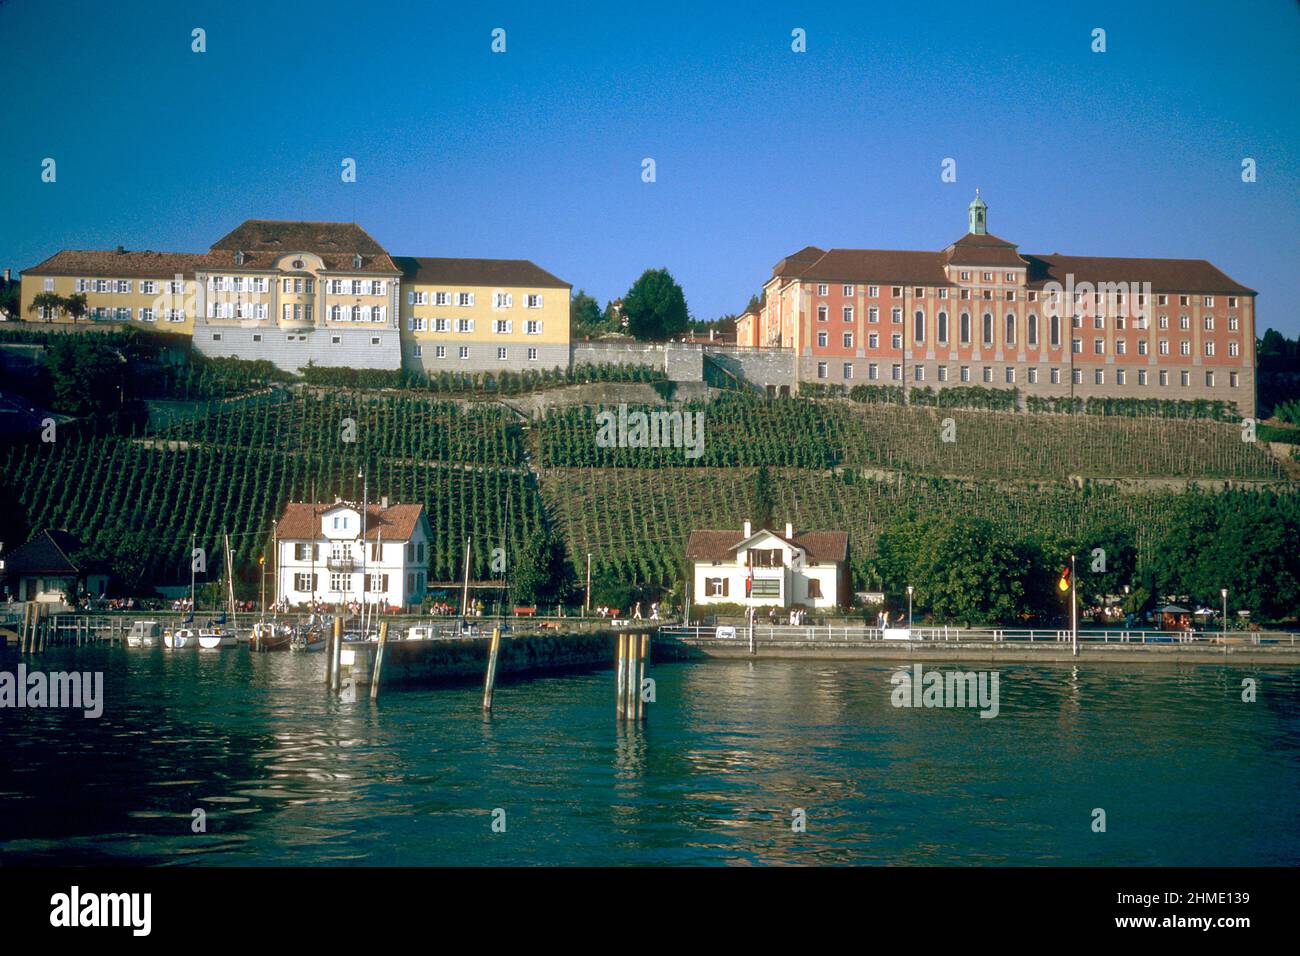 View of State Winery and former seminary building from Lake Constance in 1981, Meersburg, Baden-Württemberg, Germany Stock Photo